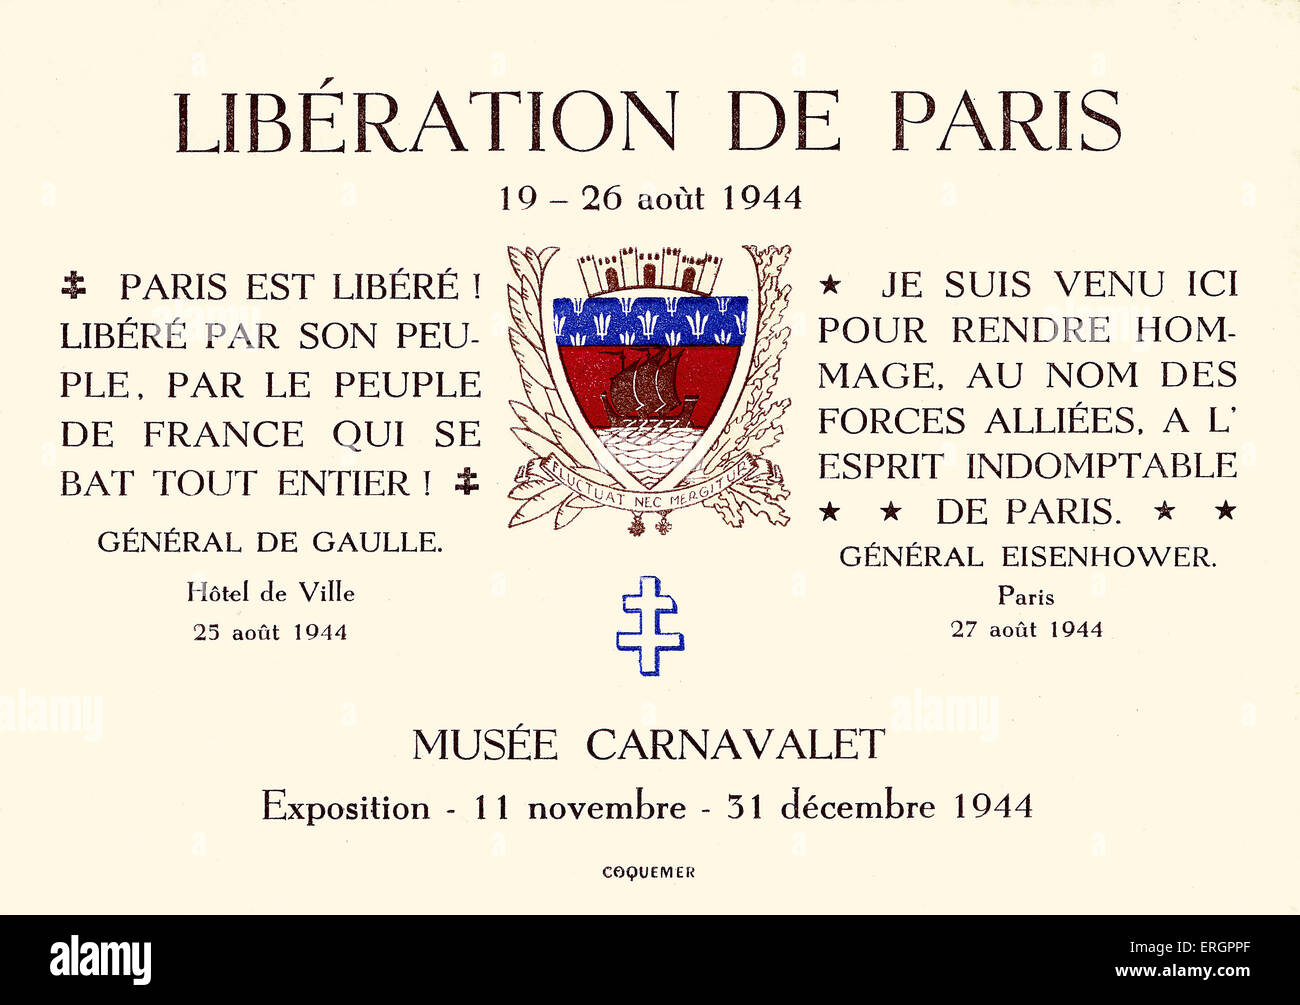 WWII - Liberation of Paris. Postcard promoting an exhibition about the Liberation of Paris (19-26 August 1944), at the Musee Stock Photo